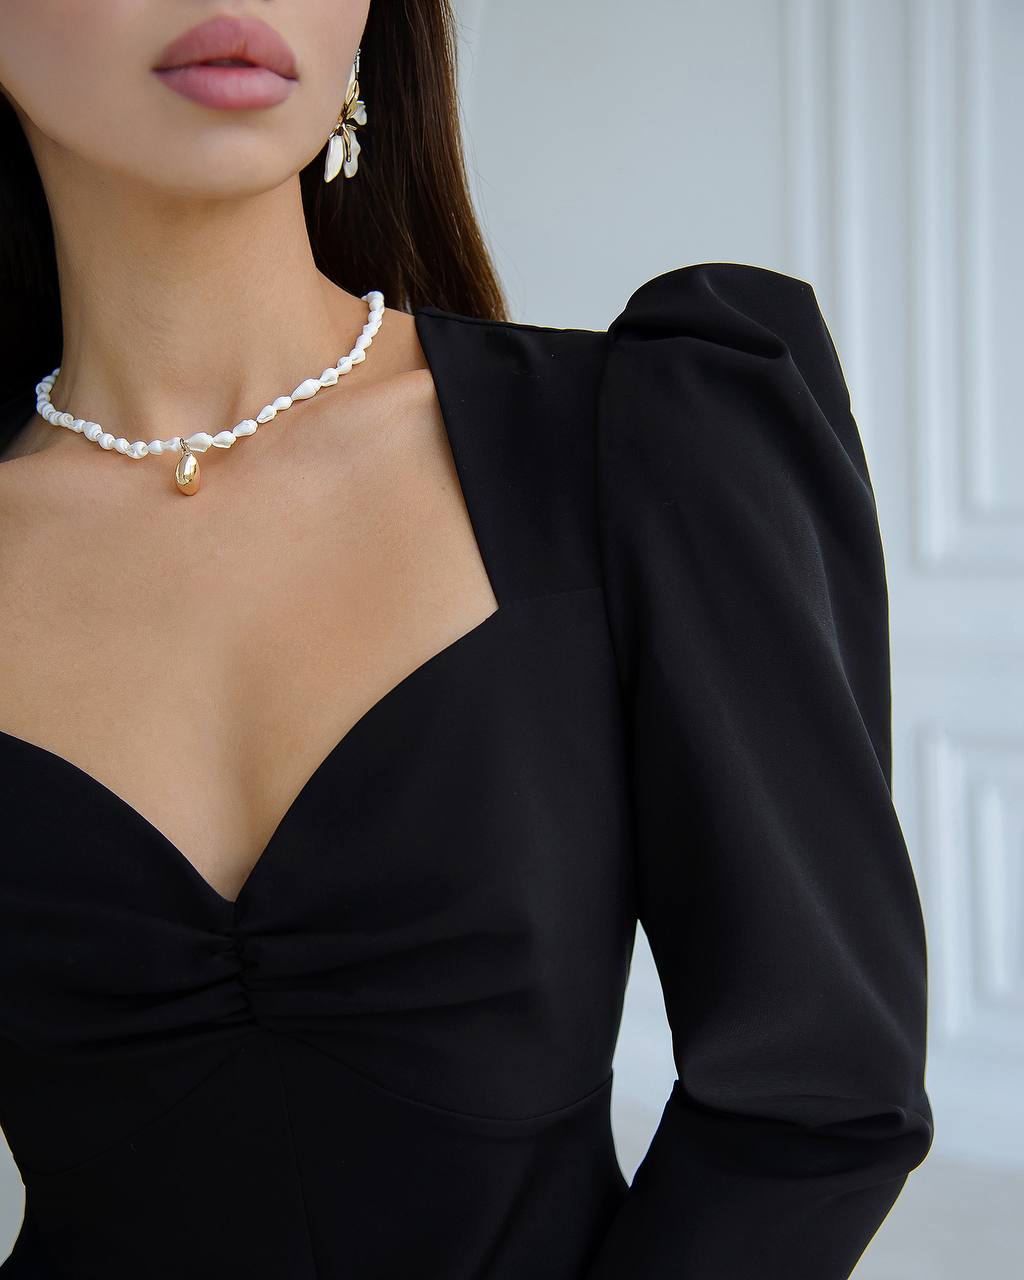 a woman in a black dress wearing a pearl necklace